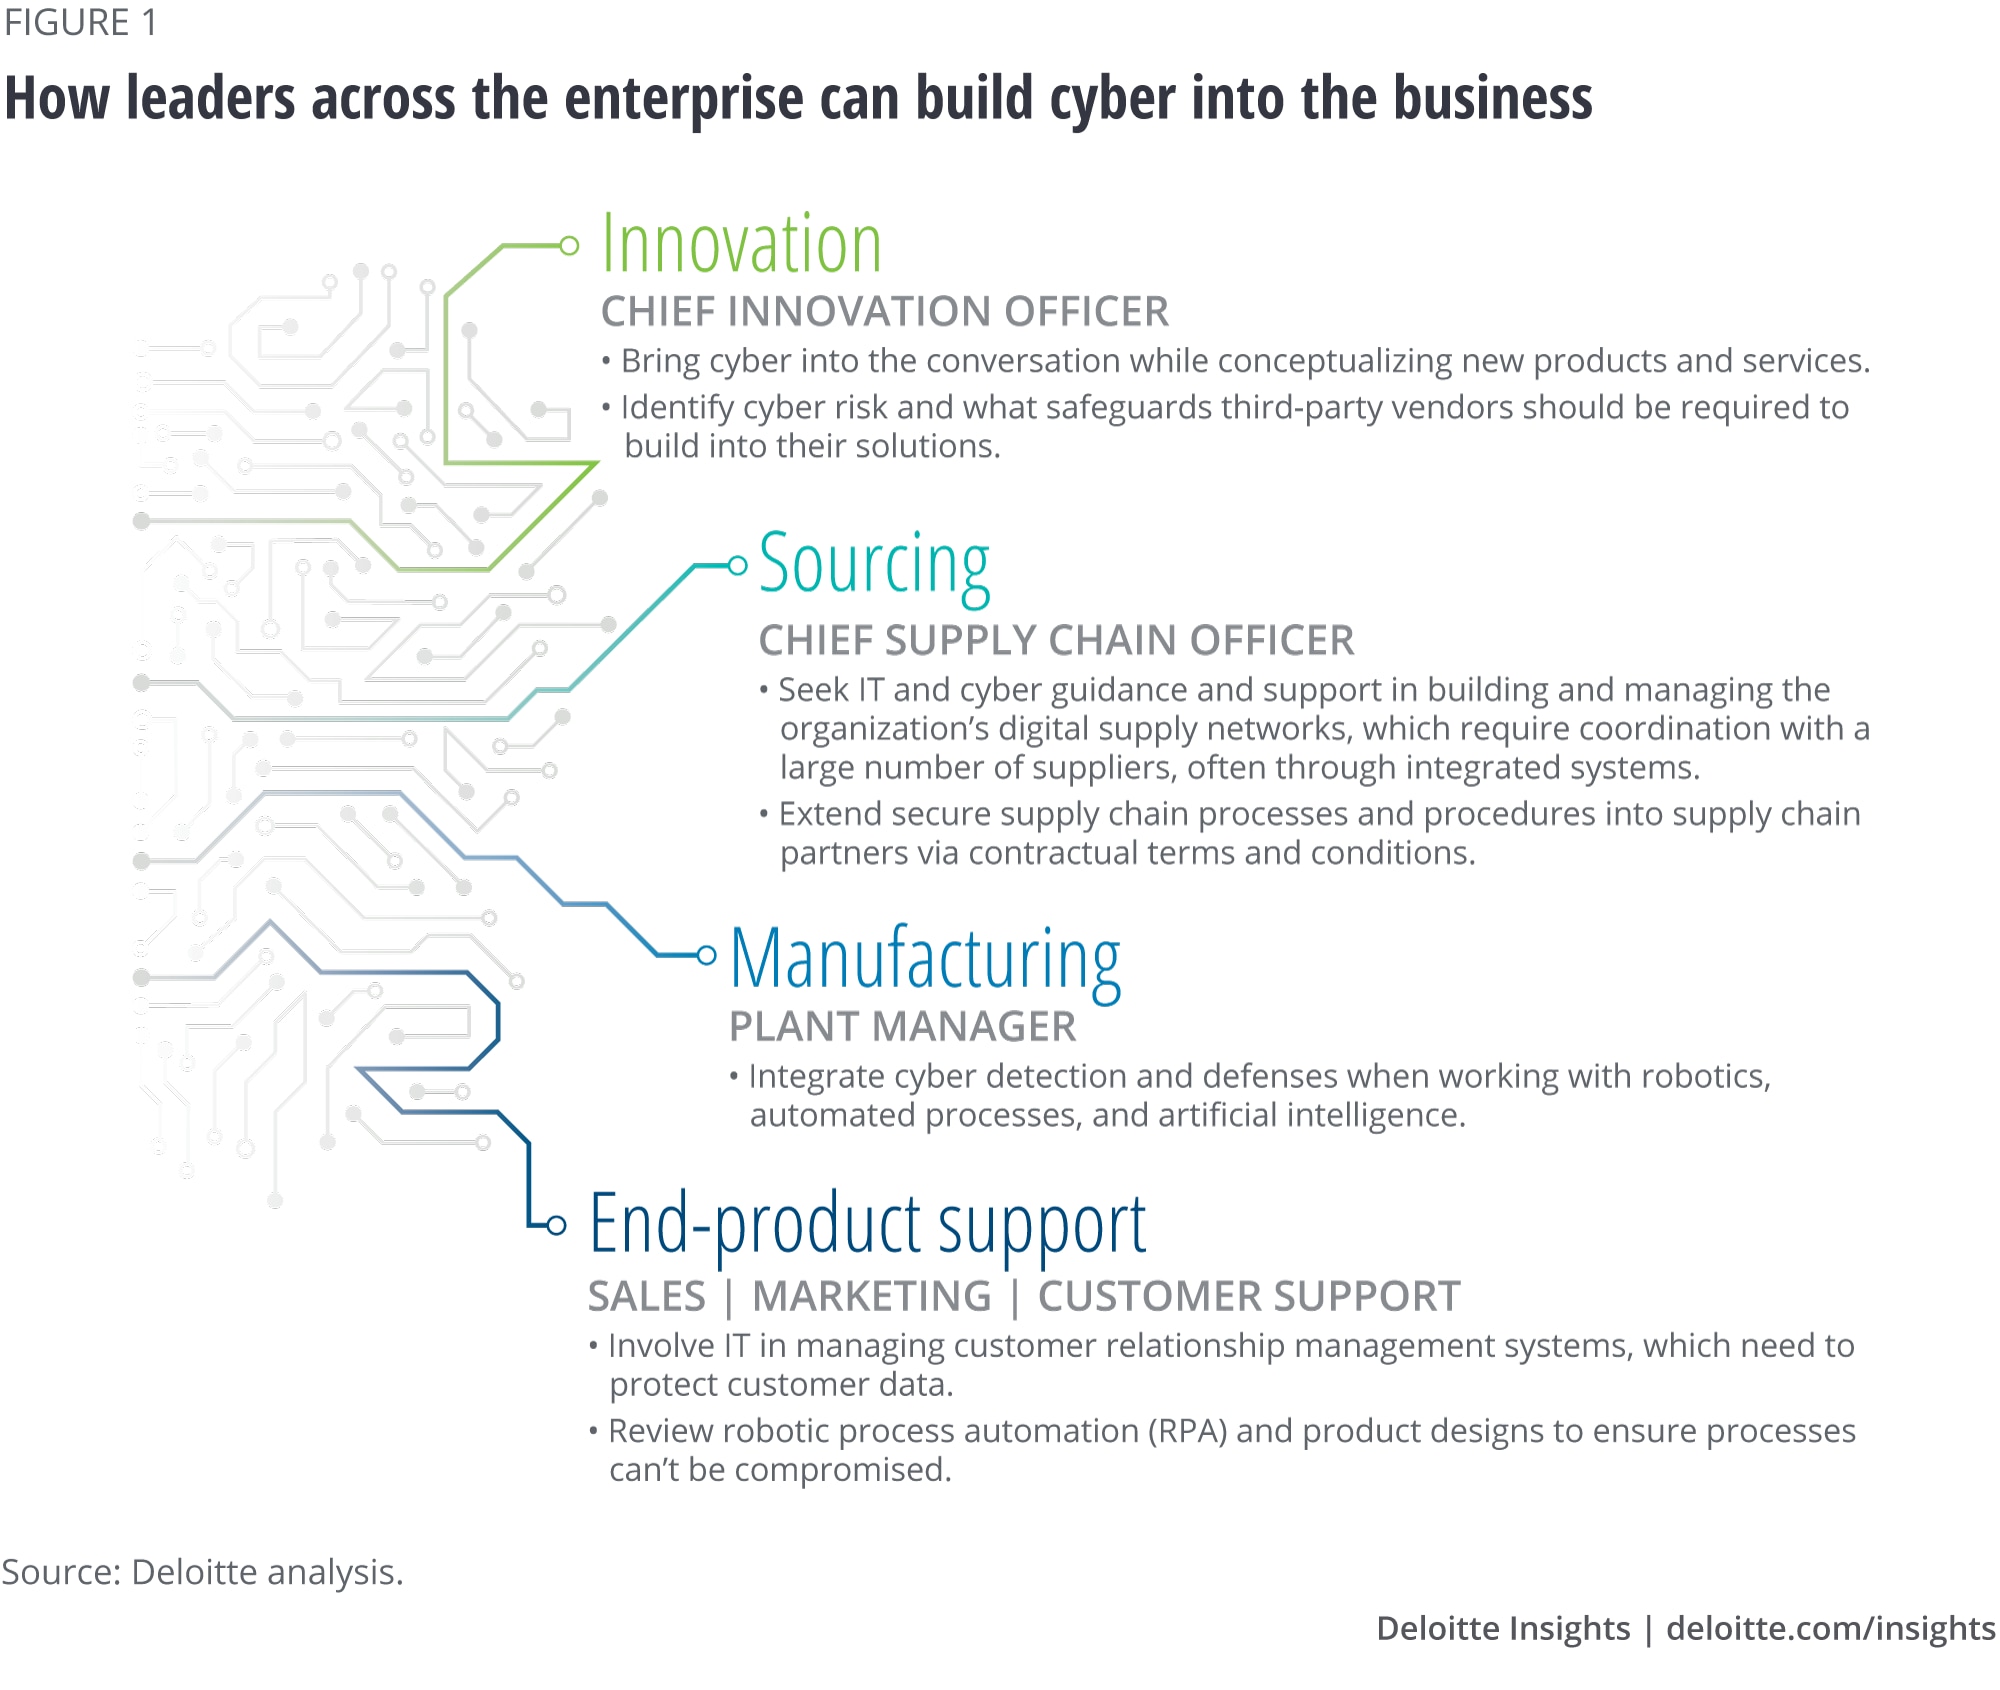 How leaders across the enterprise can build cyber into the business